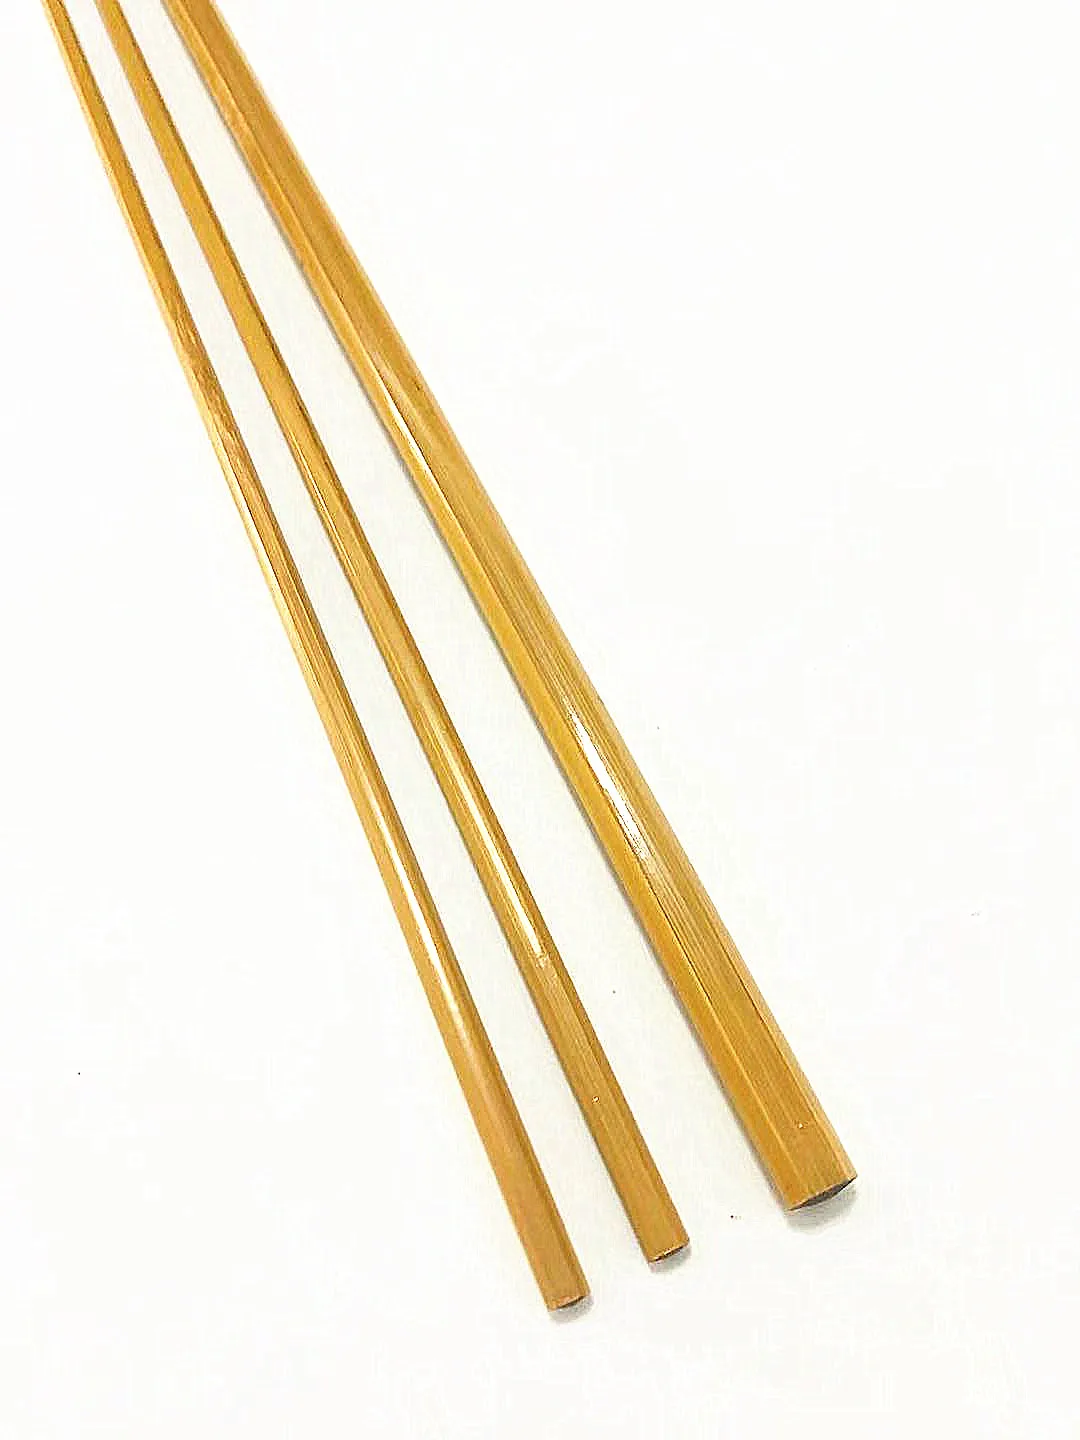 ZHUSRODS Bamboo Fly Rod Blanks 7'0~4 wt / Fly Fishing Rods & Canes / Rod  Building & Repair / Vintage